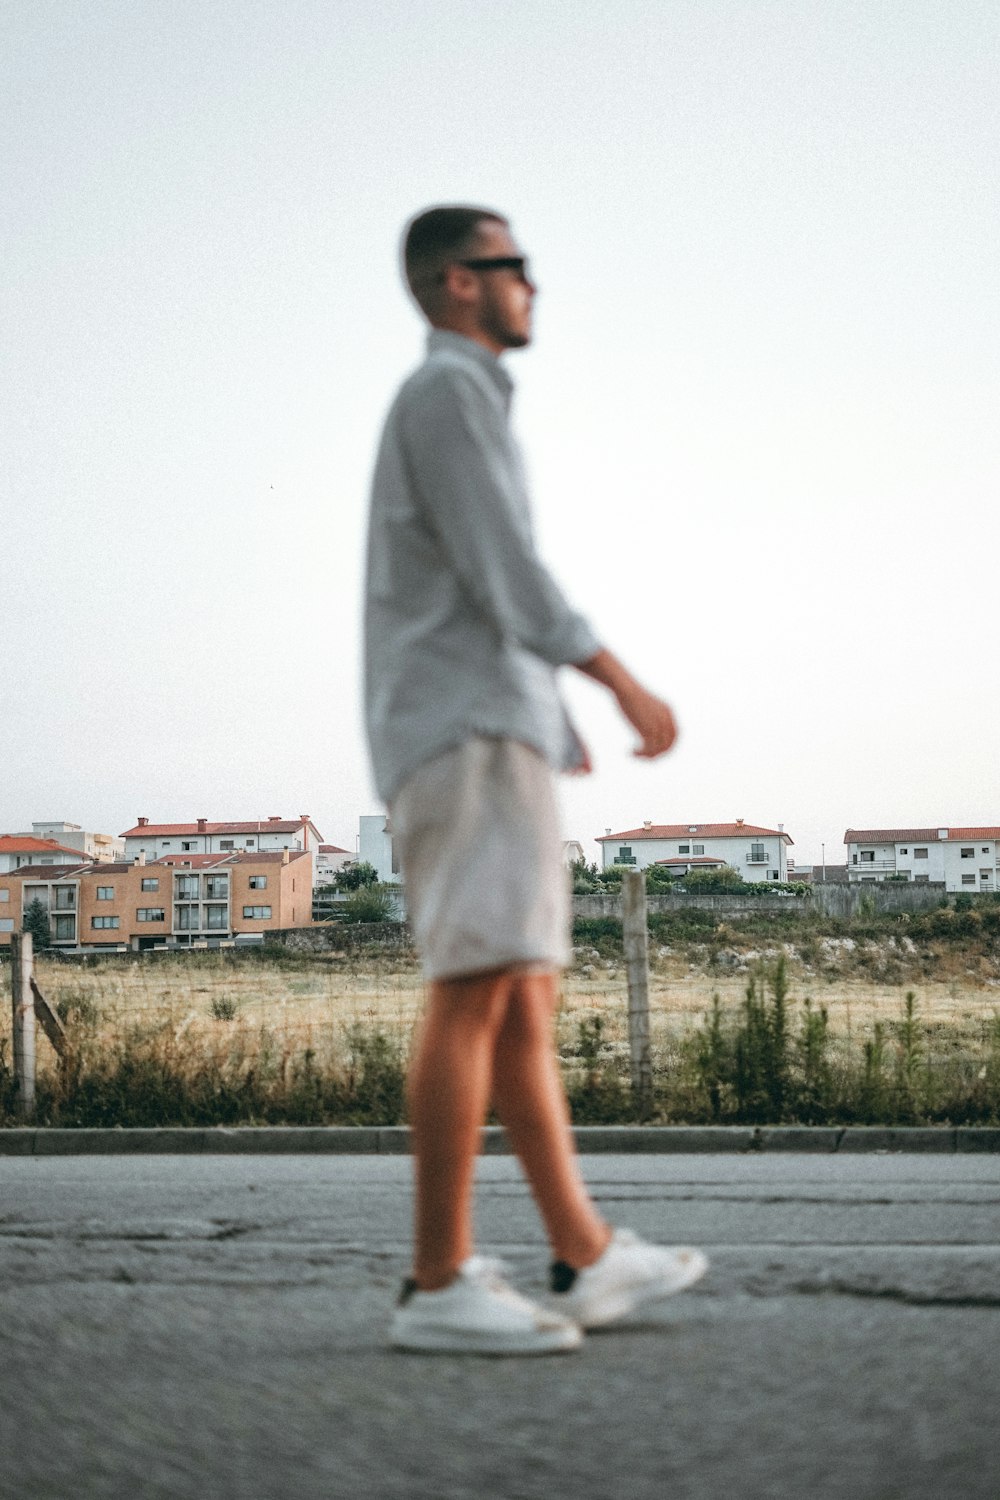 a man walking down the street in a white shirt and shorts